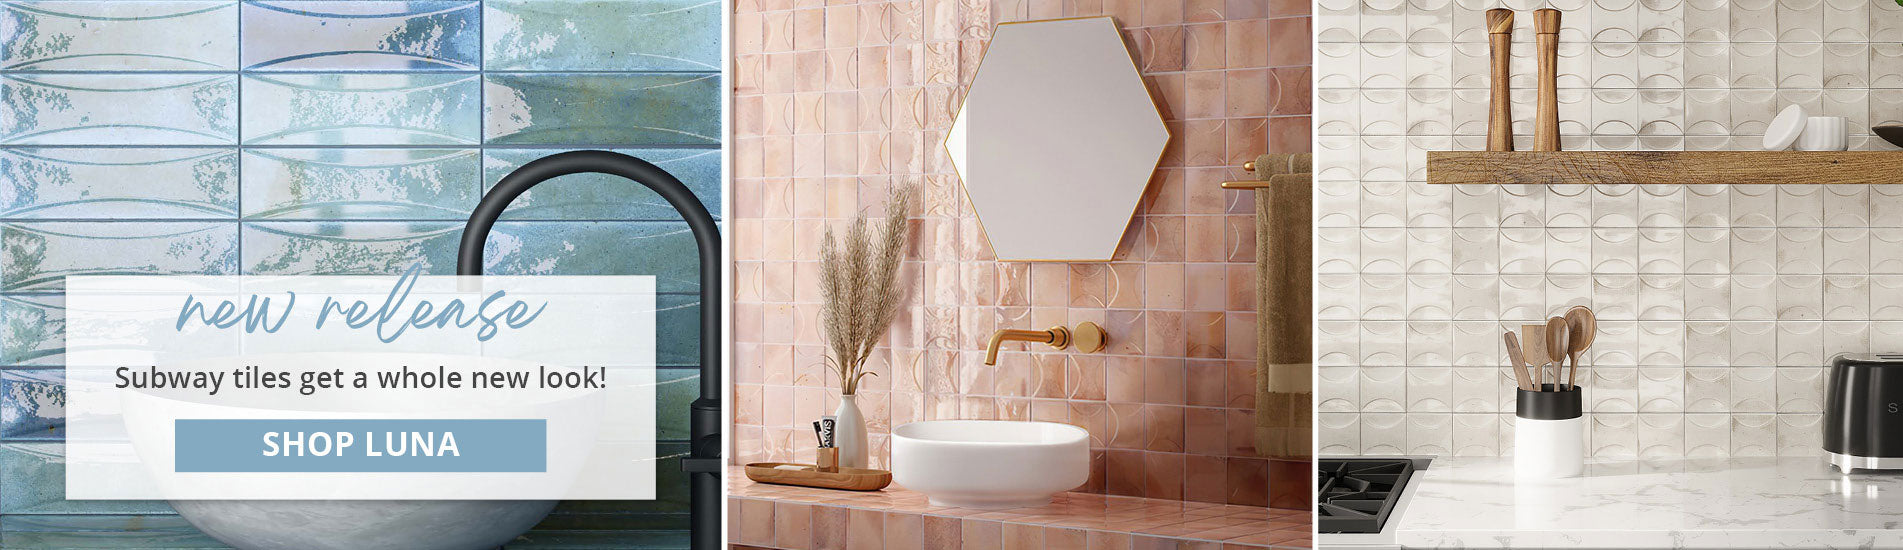 Subway tiles get a whole new look